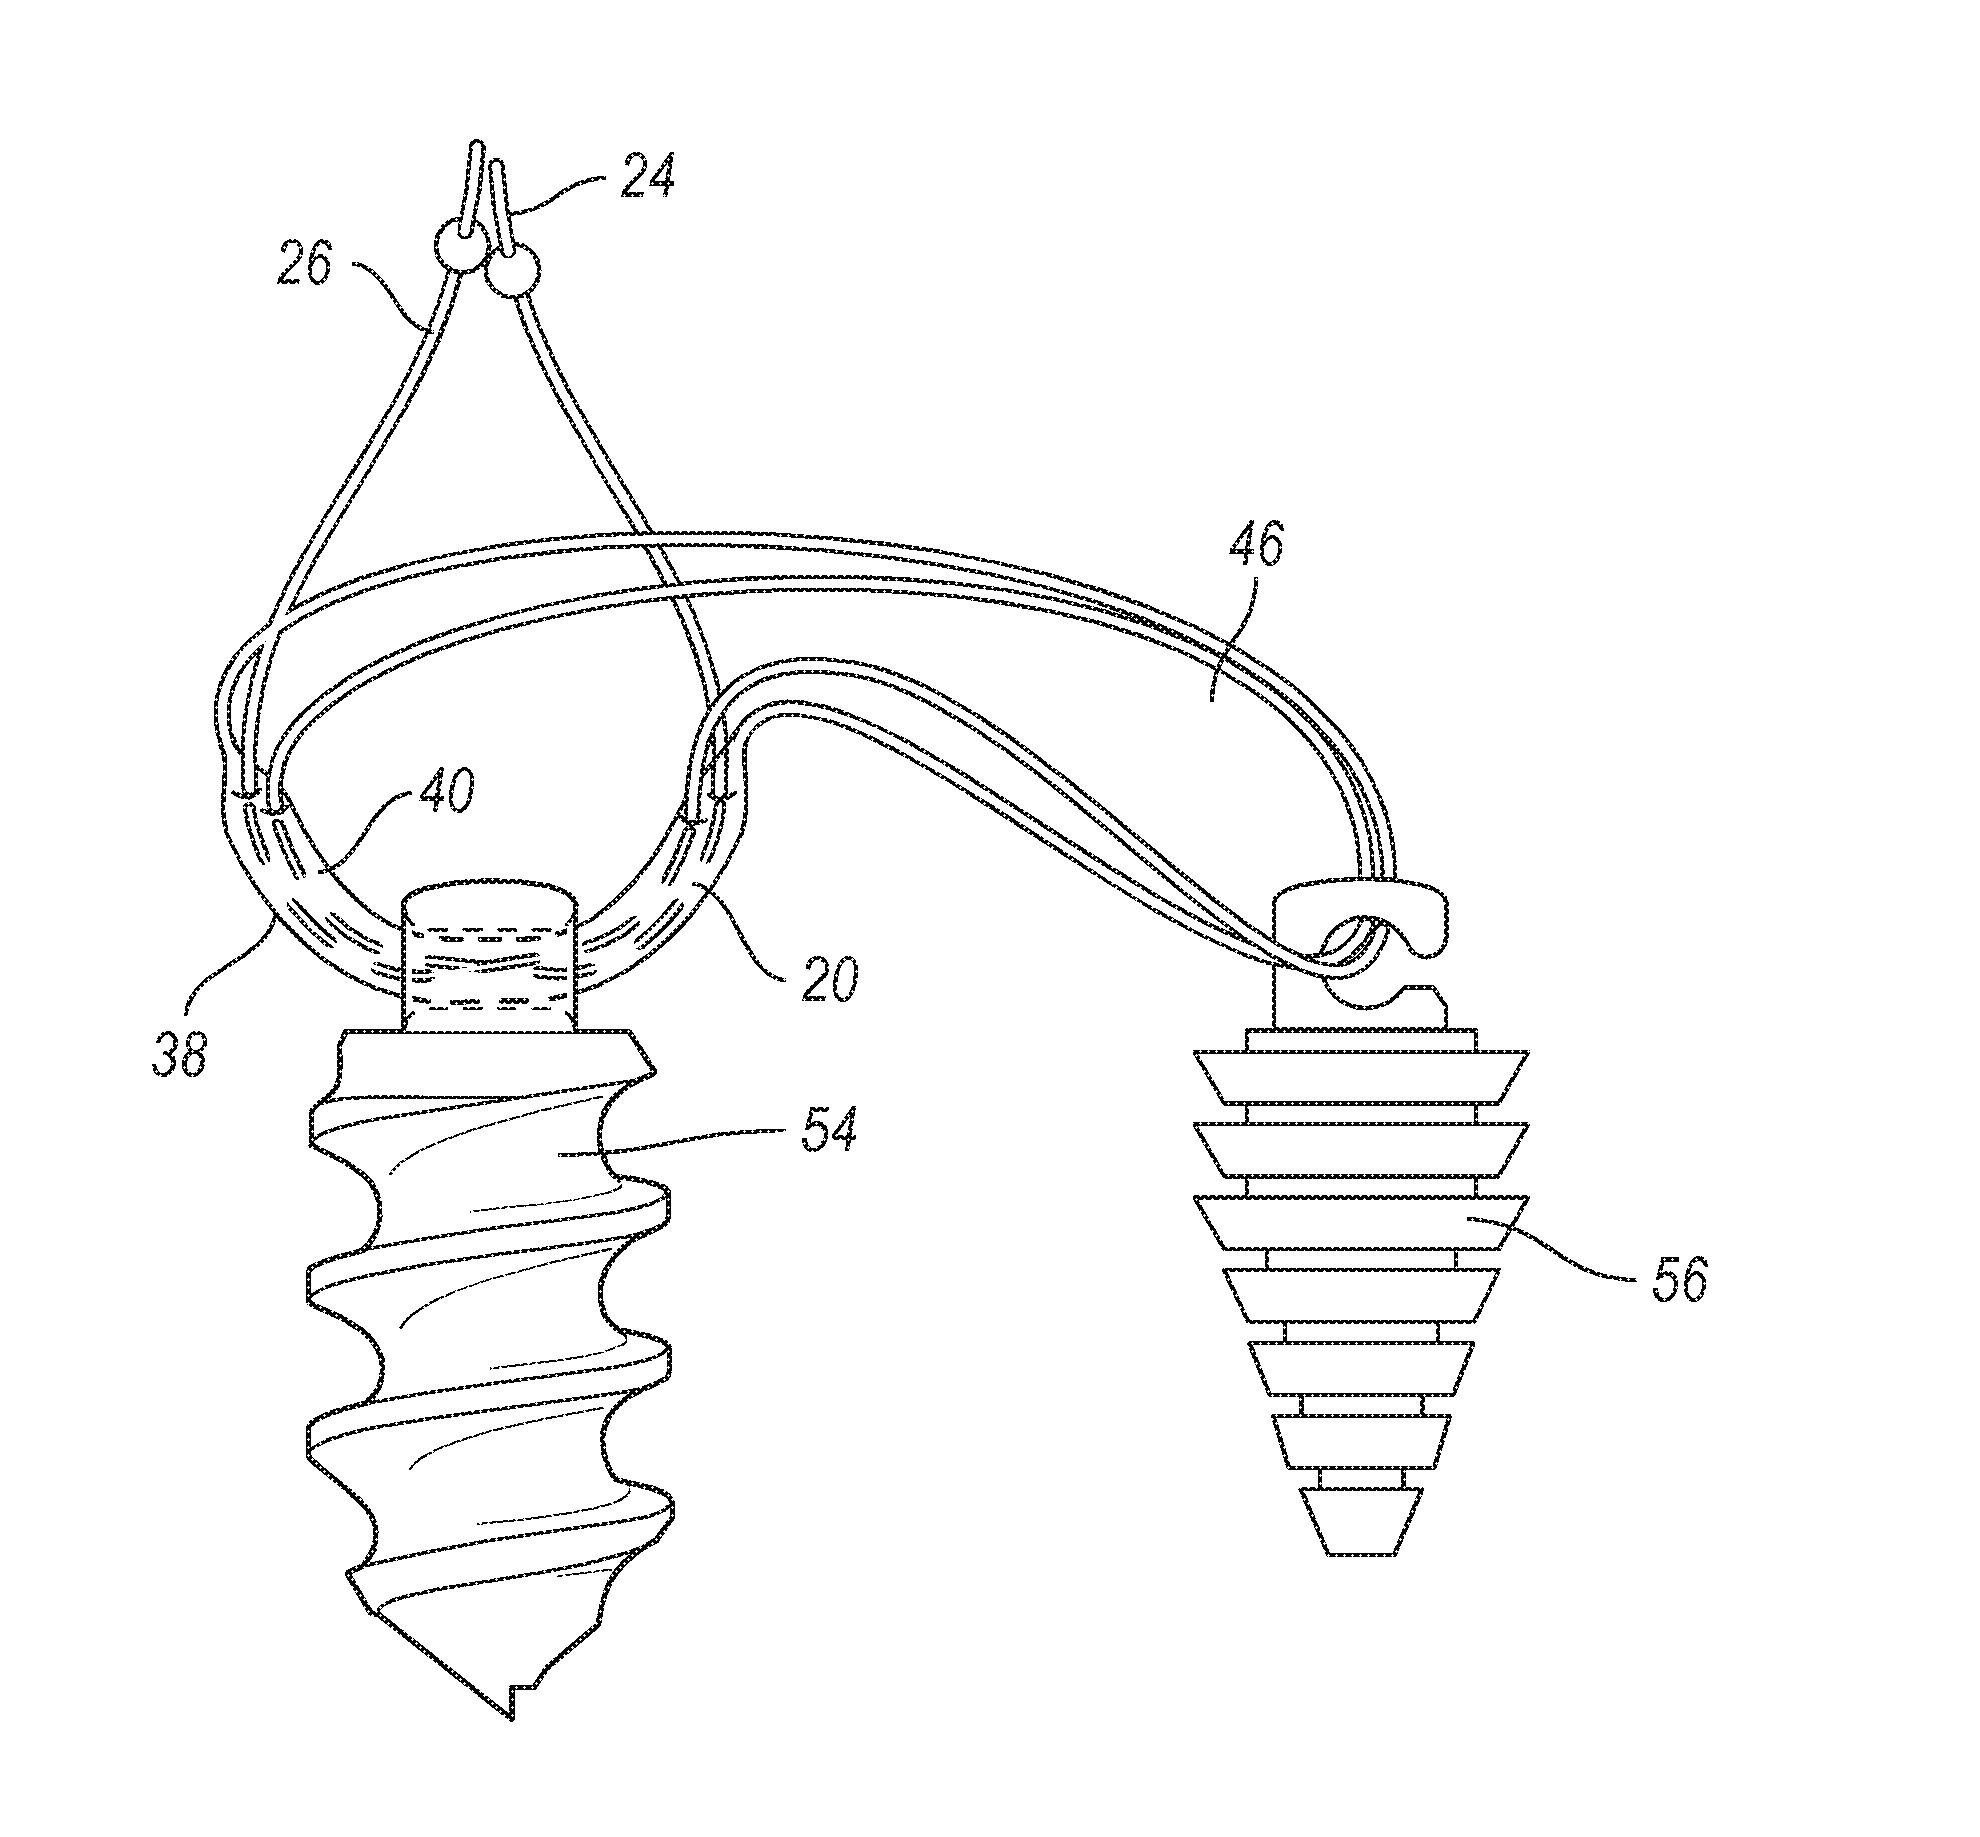 Method and apparatus for coupling anatomical features